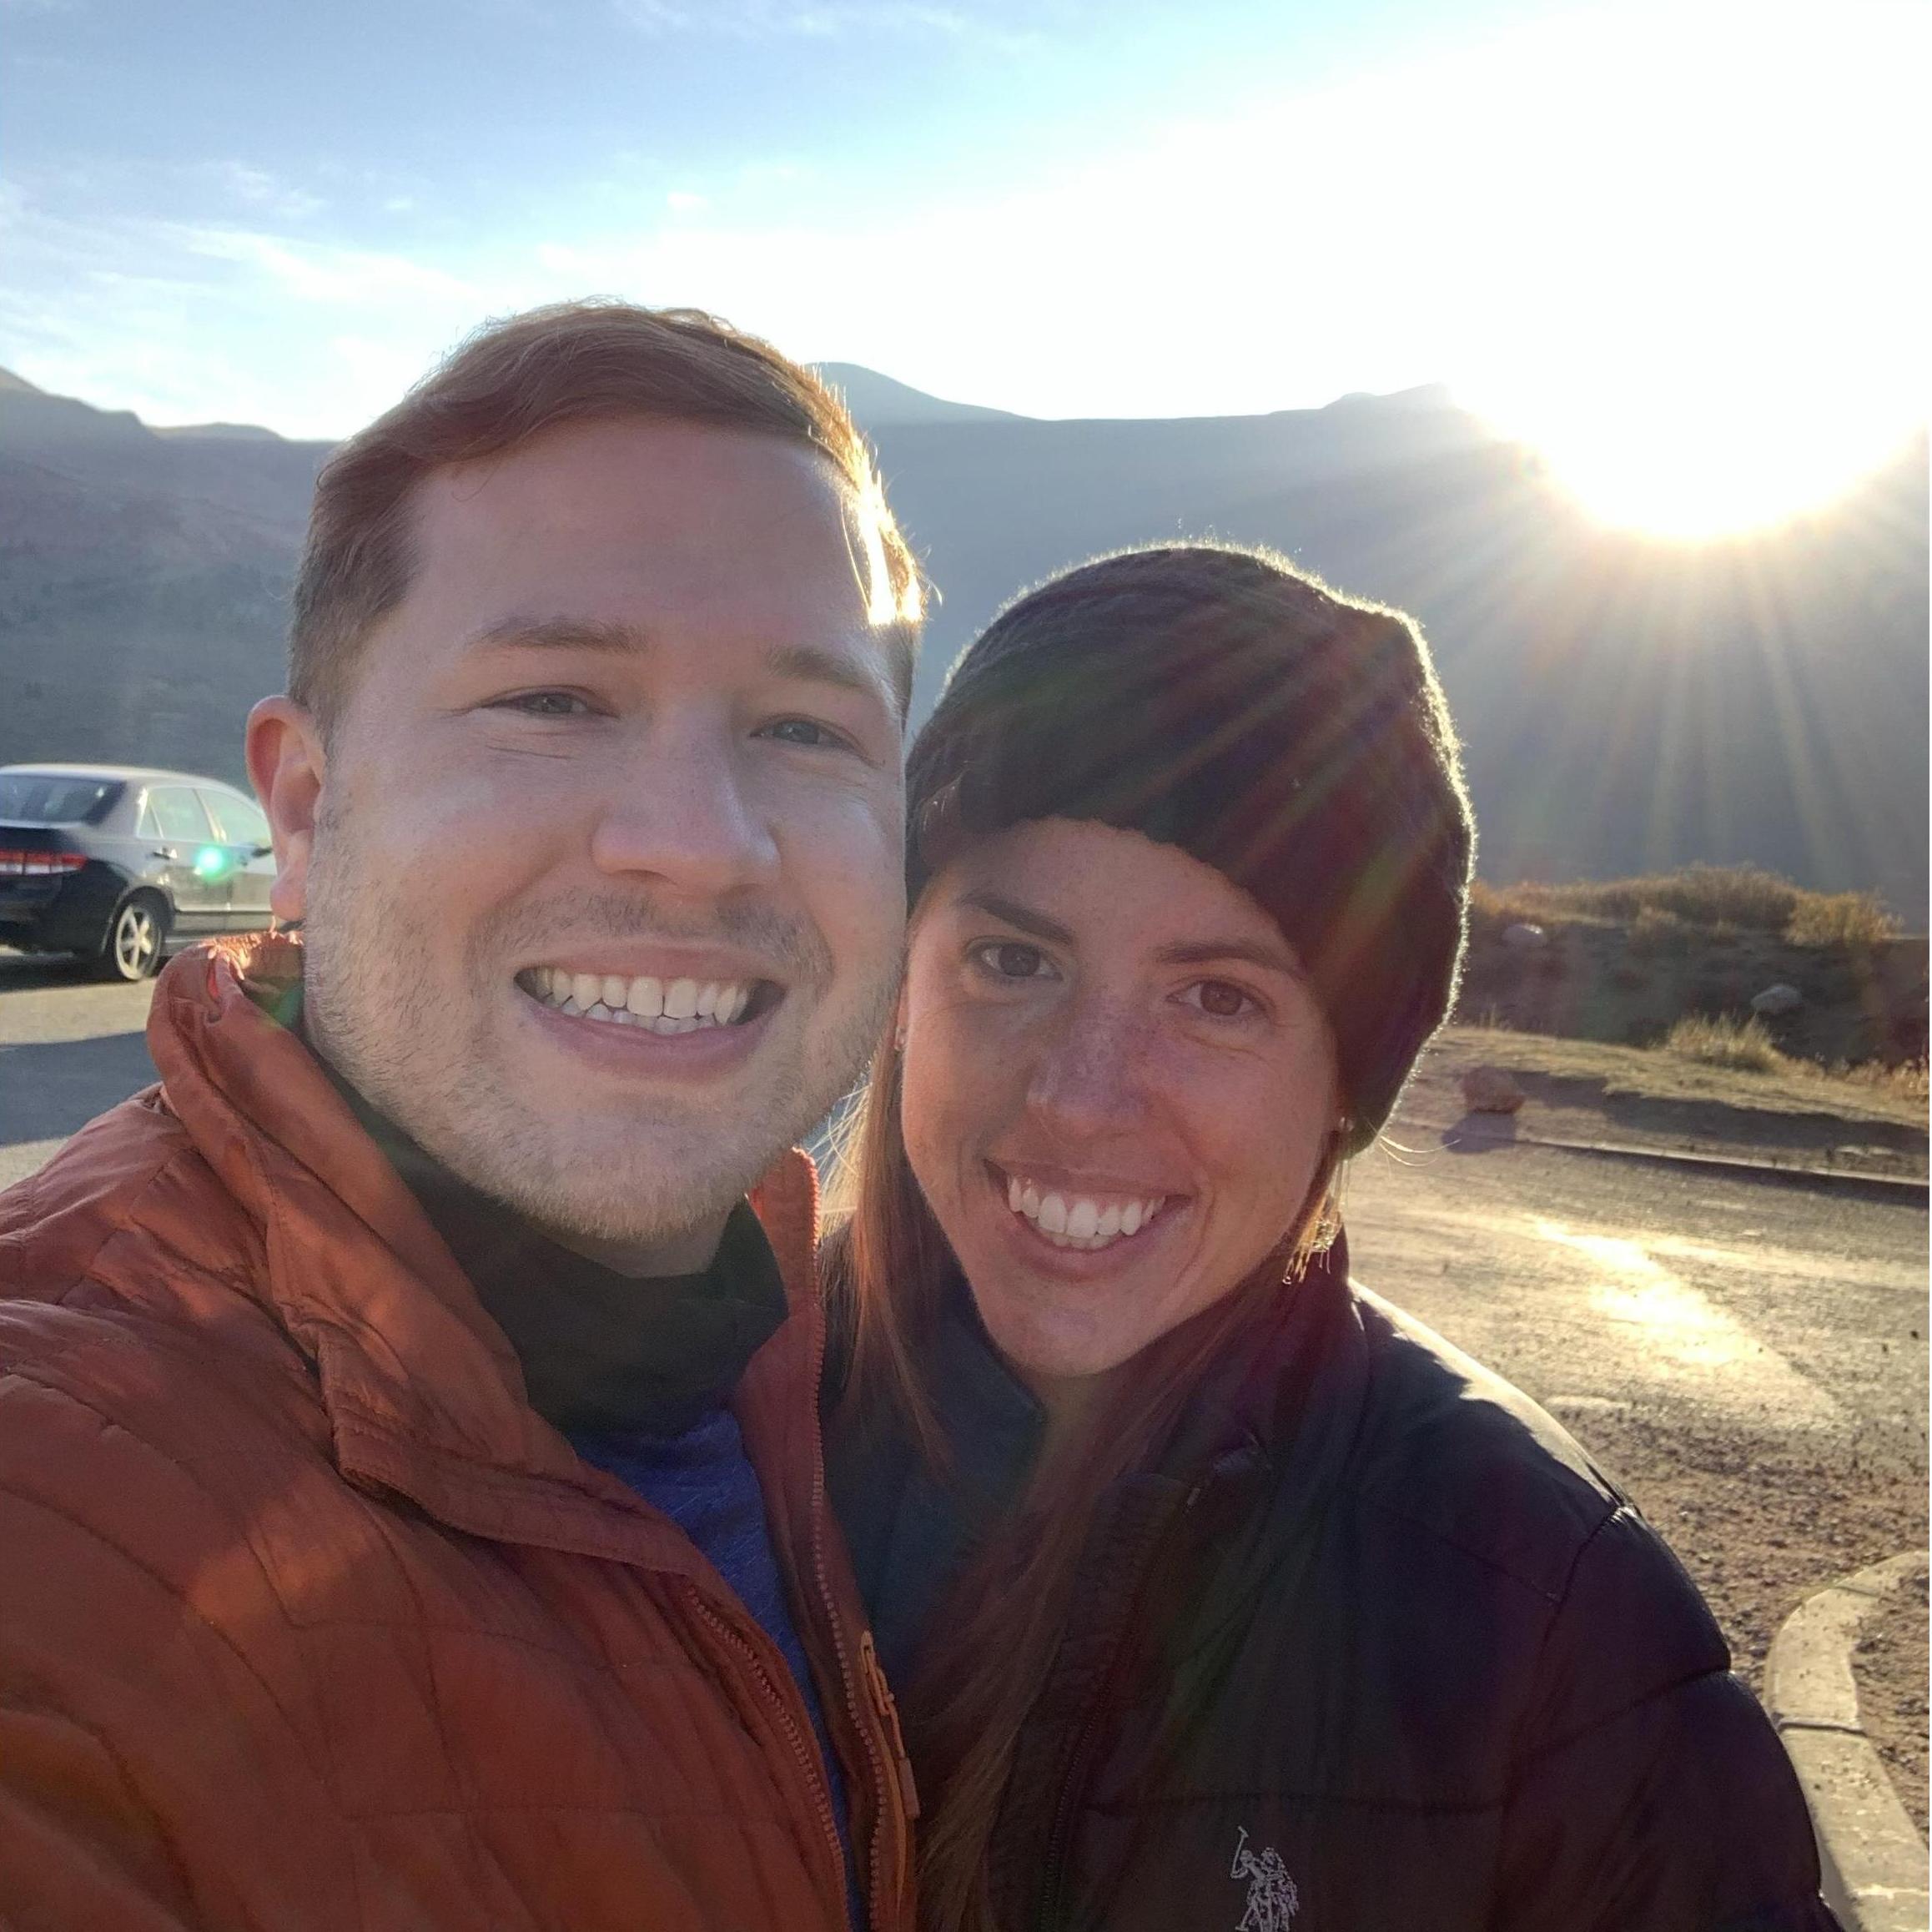 Dawn should have known Gary was going to propose when he was the one taking the selfies before the Mt. Bierstadt hike!